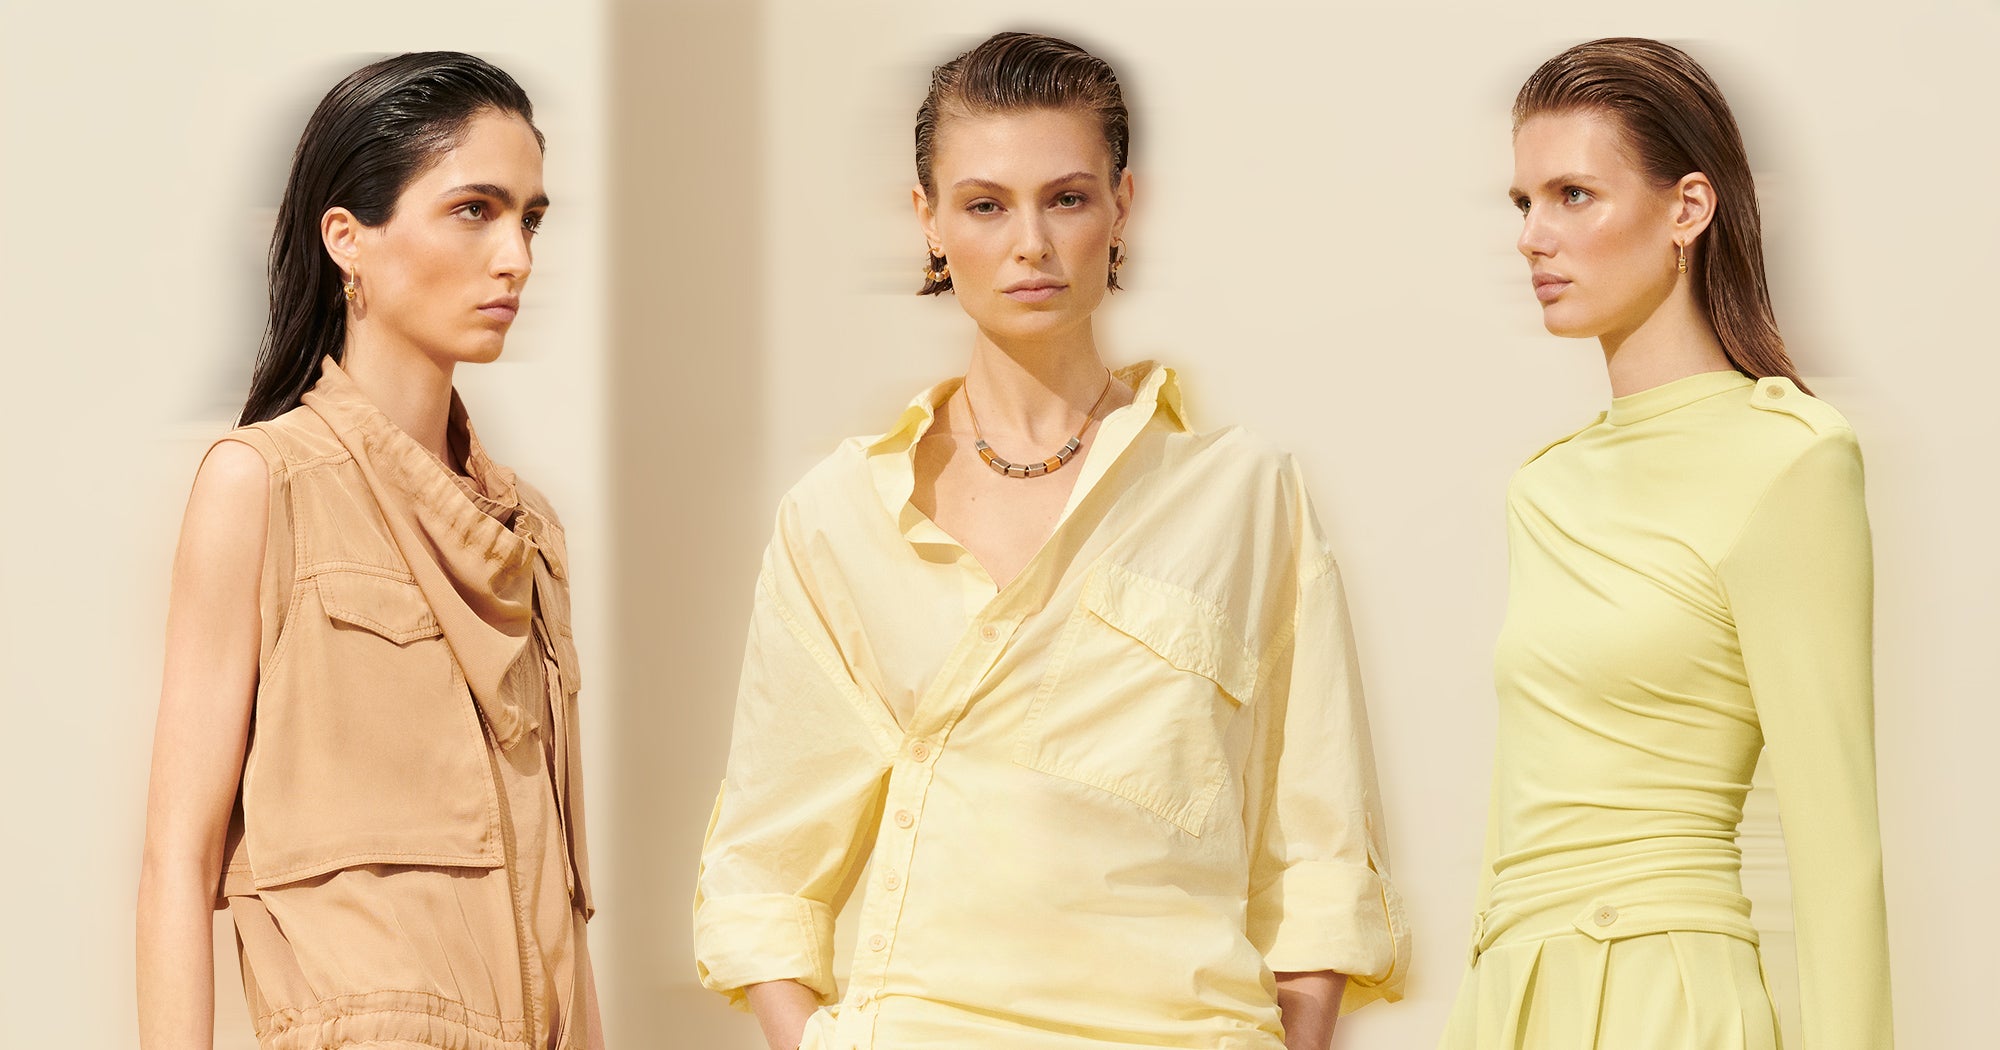 Zara’s Newest Collection Is A Fashion-Forward Take On Utilitarian Staples